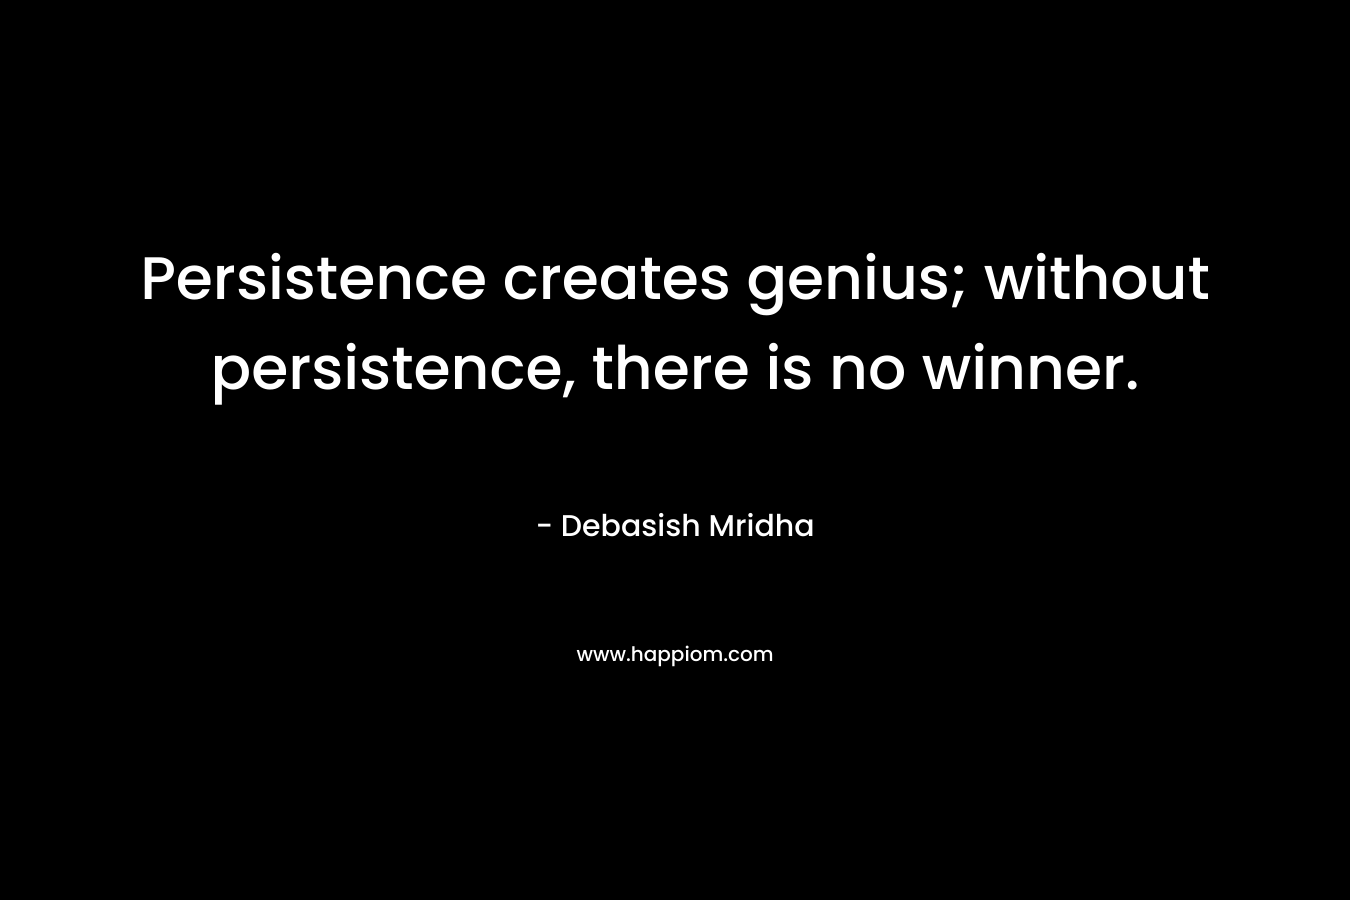 Persistence creates genius; without persistence, there is no winner.